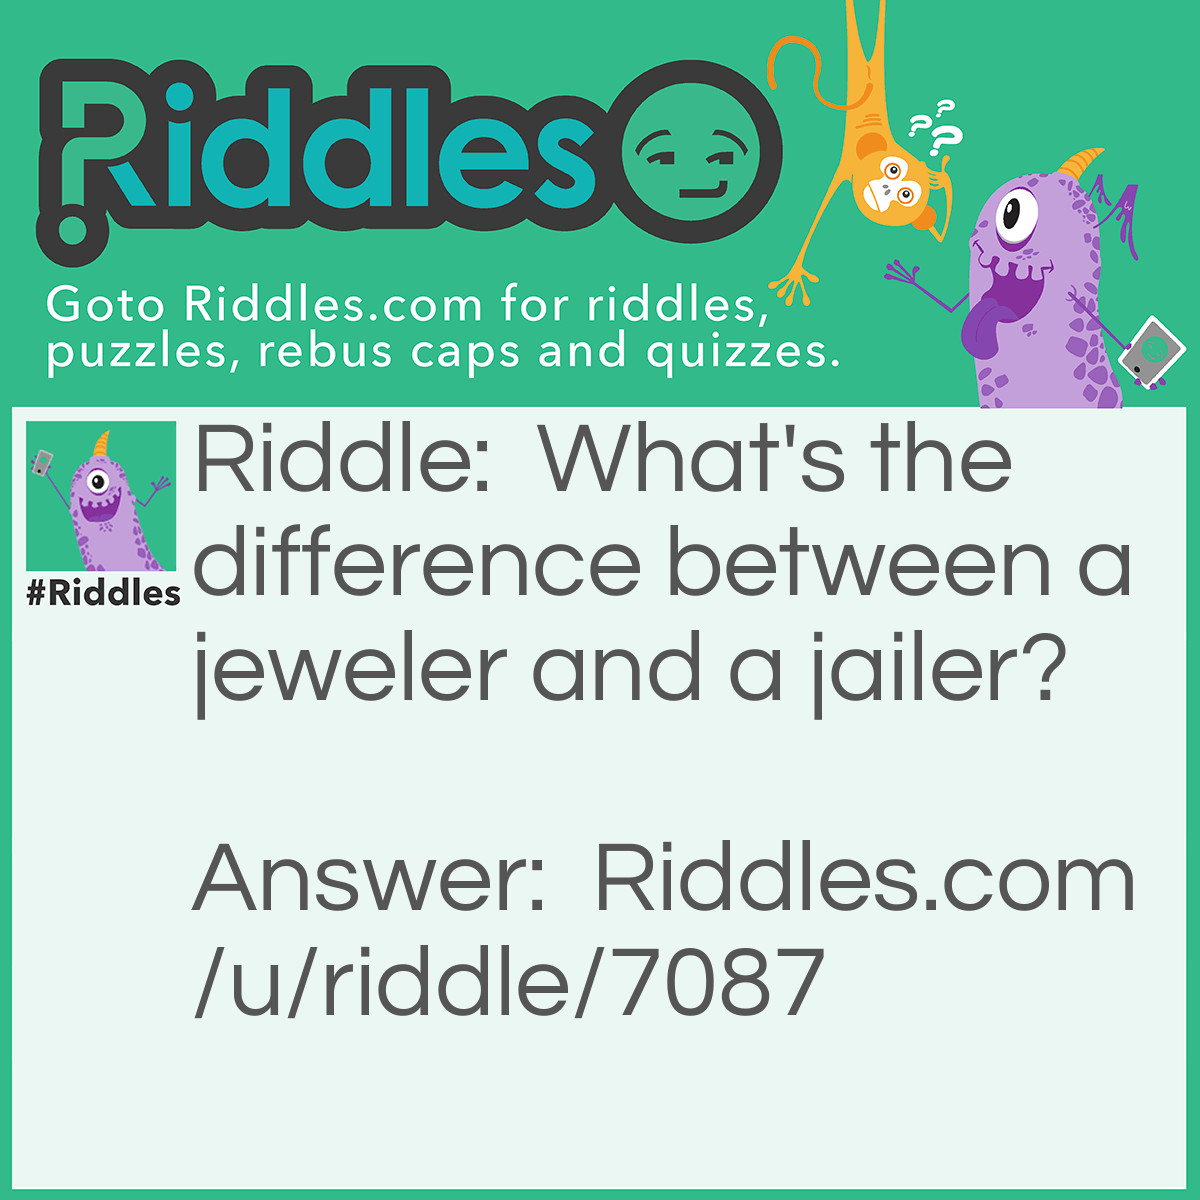 Riddle: What's the difference between a jeweler and a jailer? Answer: One sells jewels, the other jails cells.